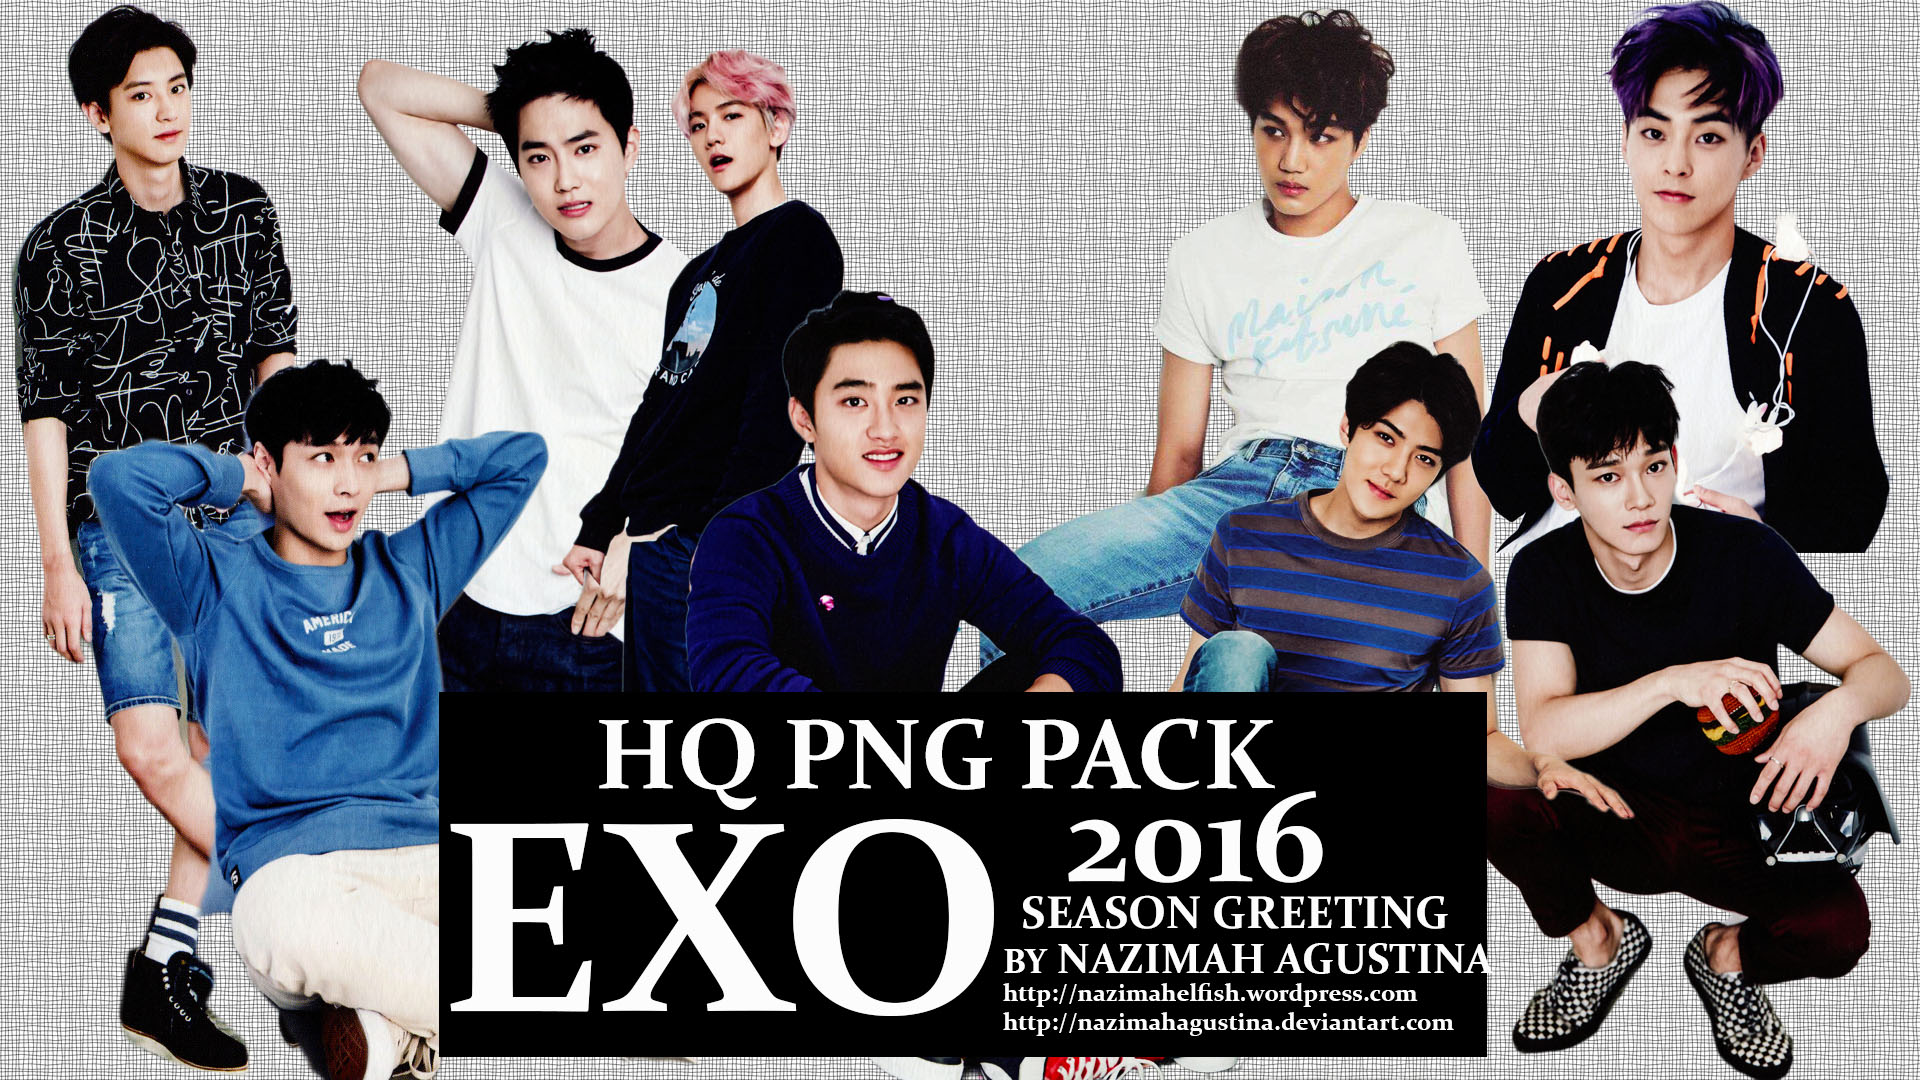 Download Hq Png Pack Exo 2016 Season Greeting By Nazimah Agustina